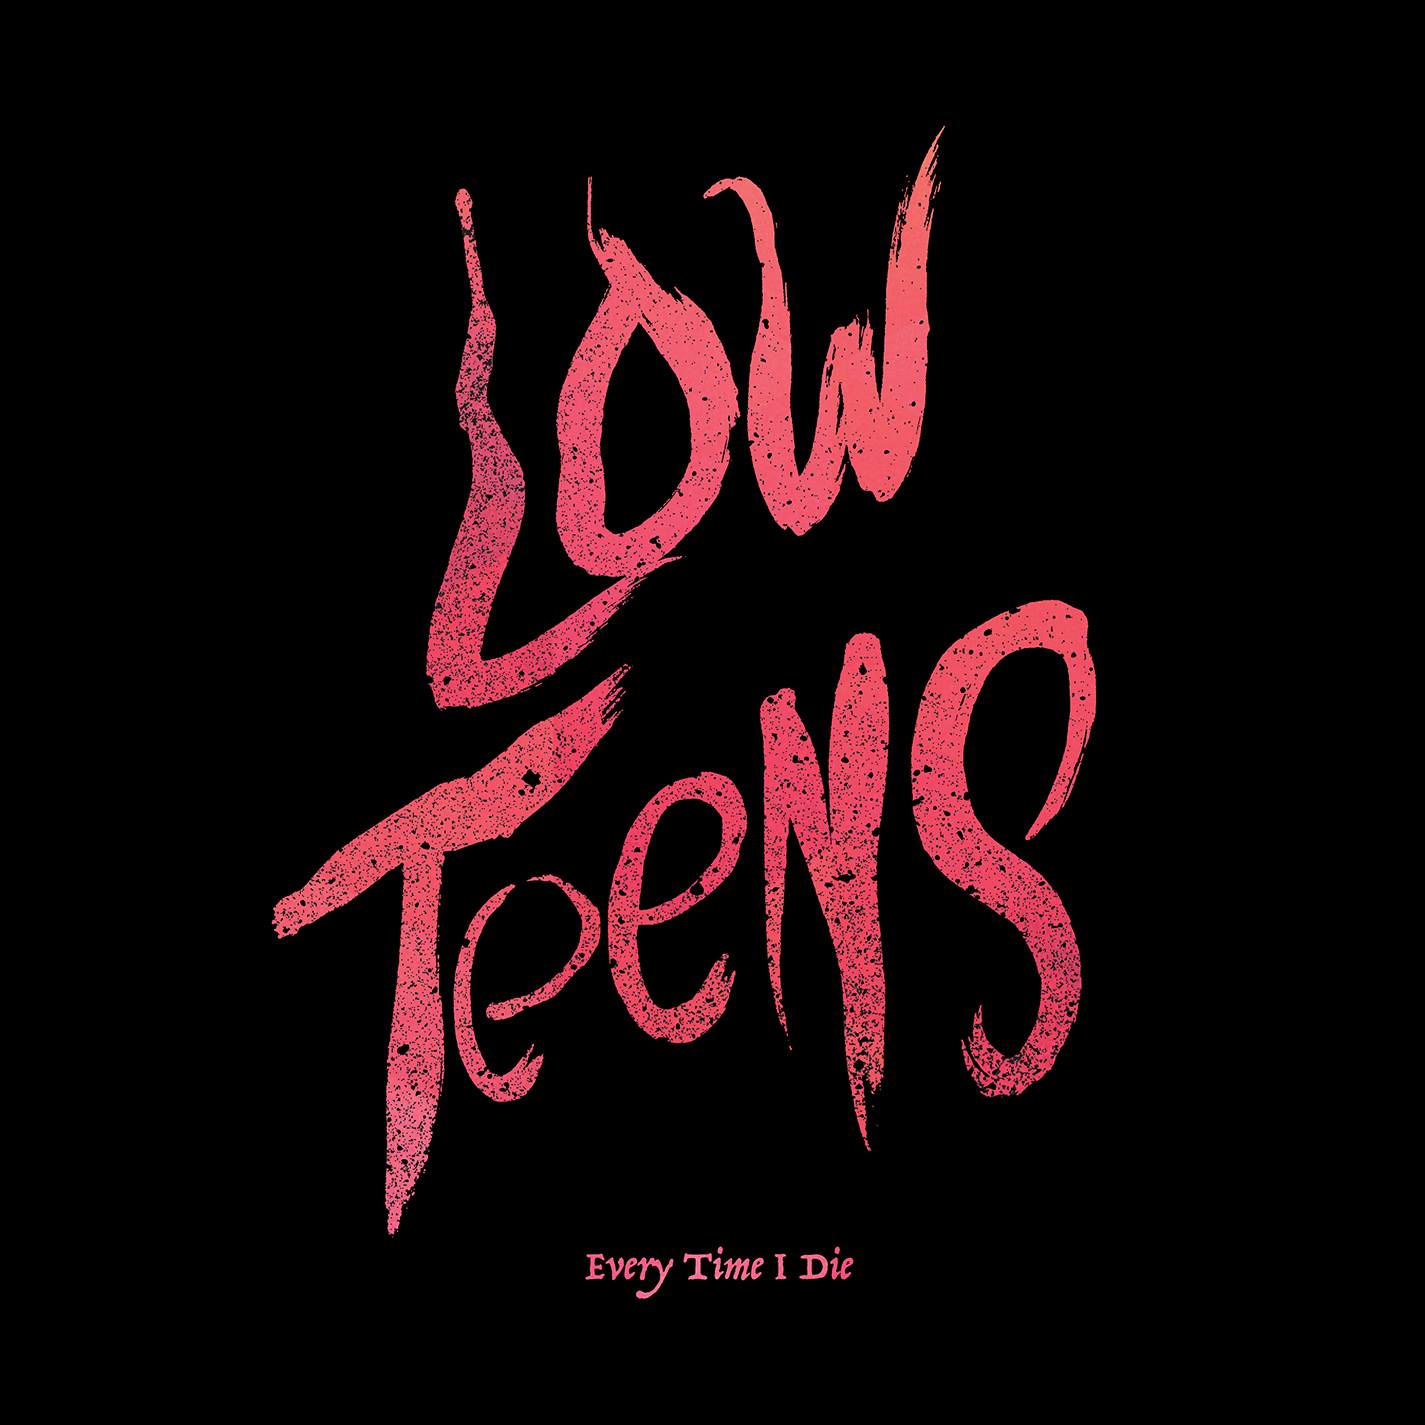 Low Are Teen 112